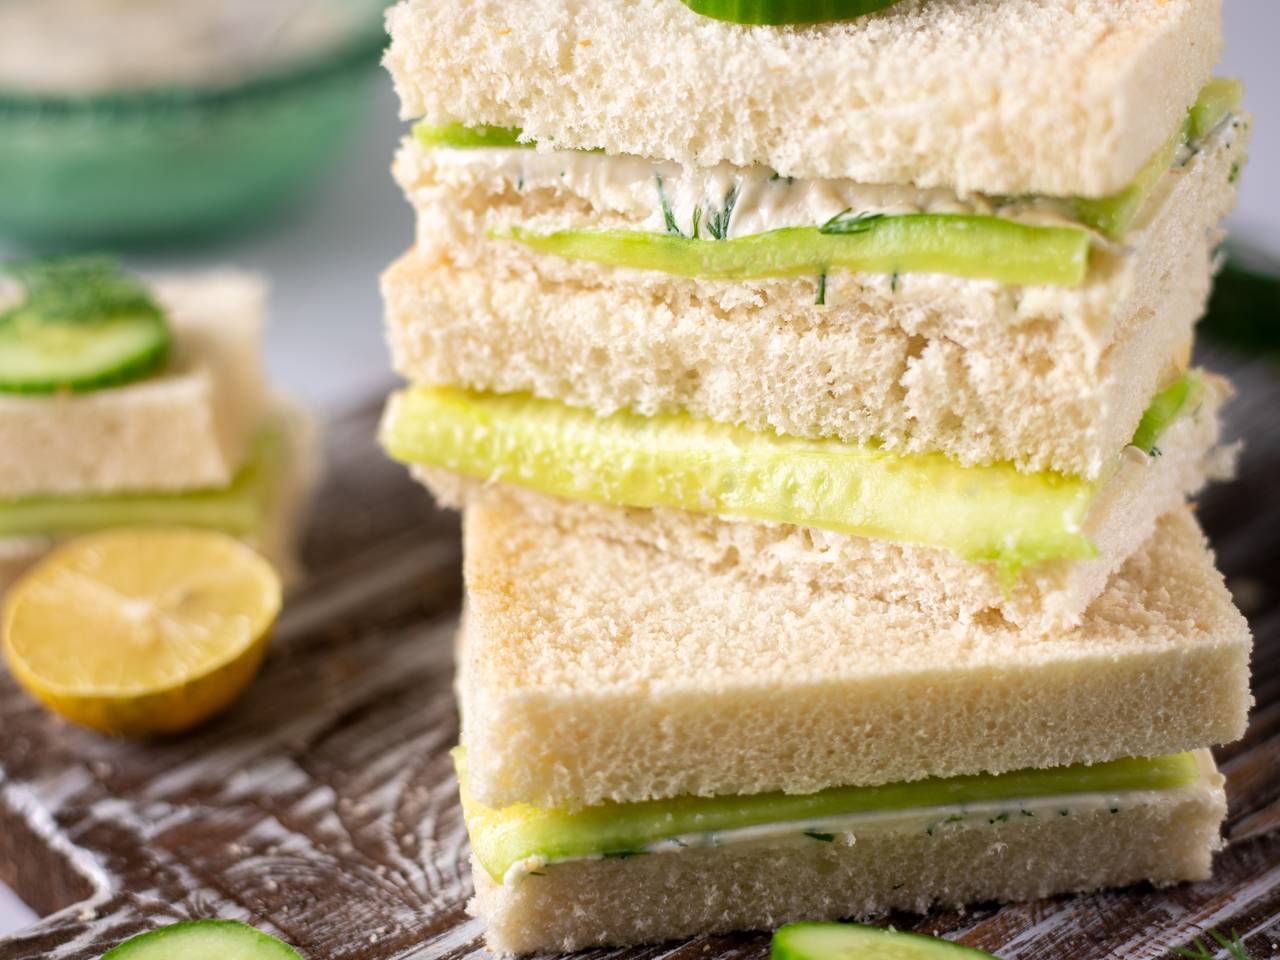 Cucumber and Dill Sandwiches